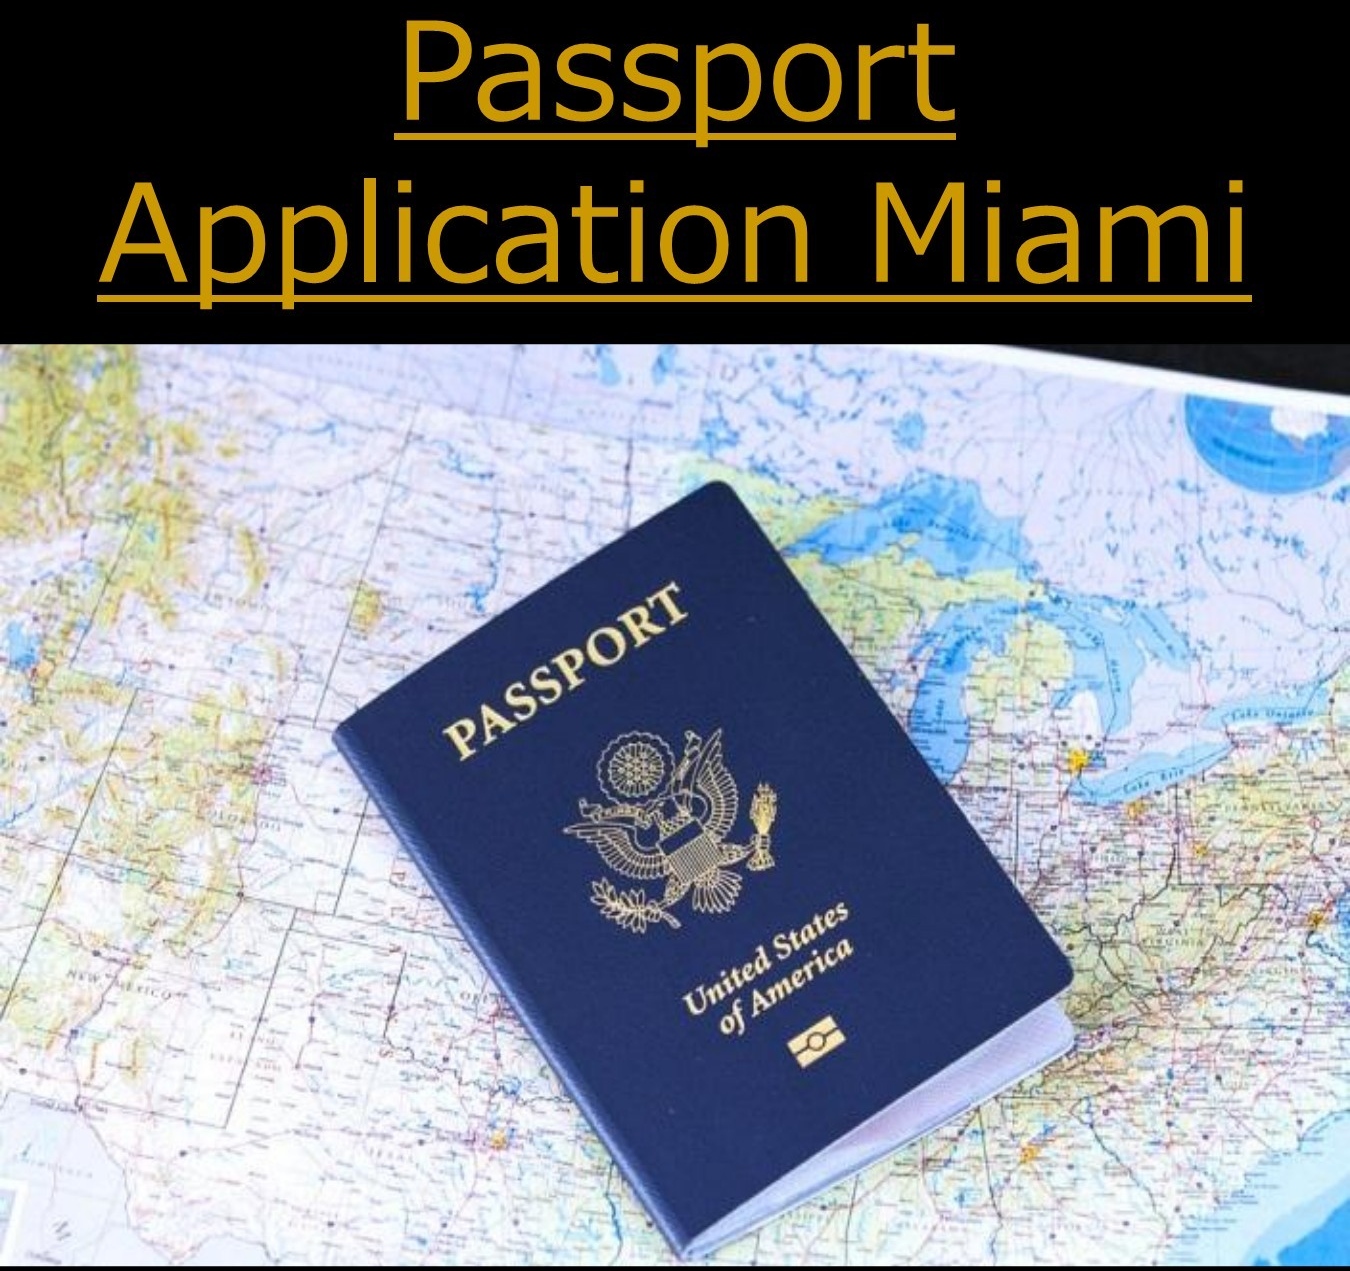 What is the Passport renewal process in Miami?